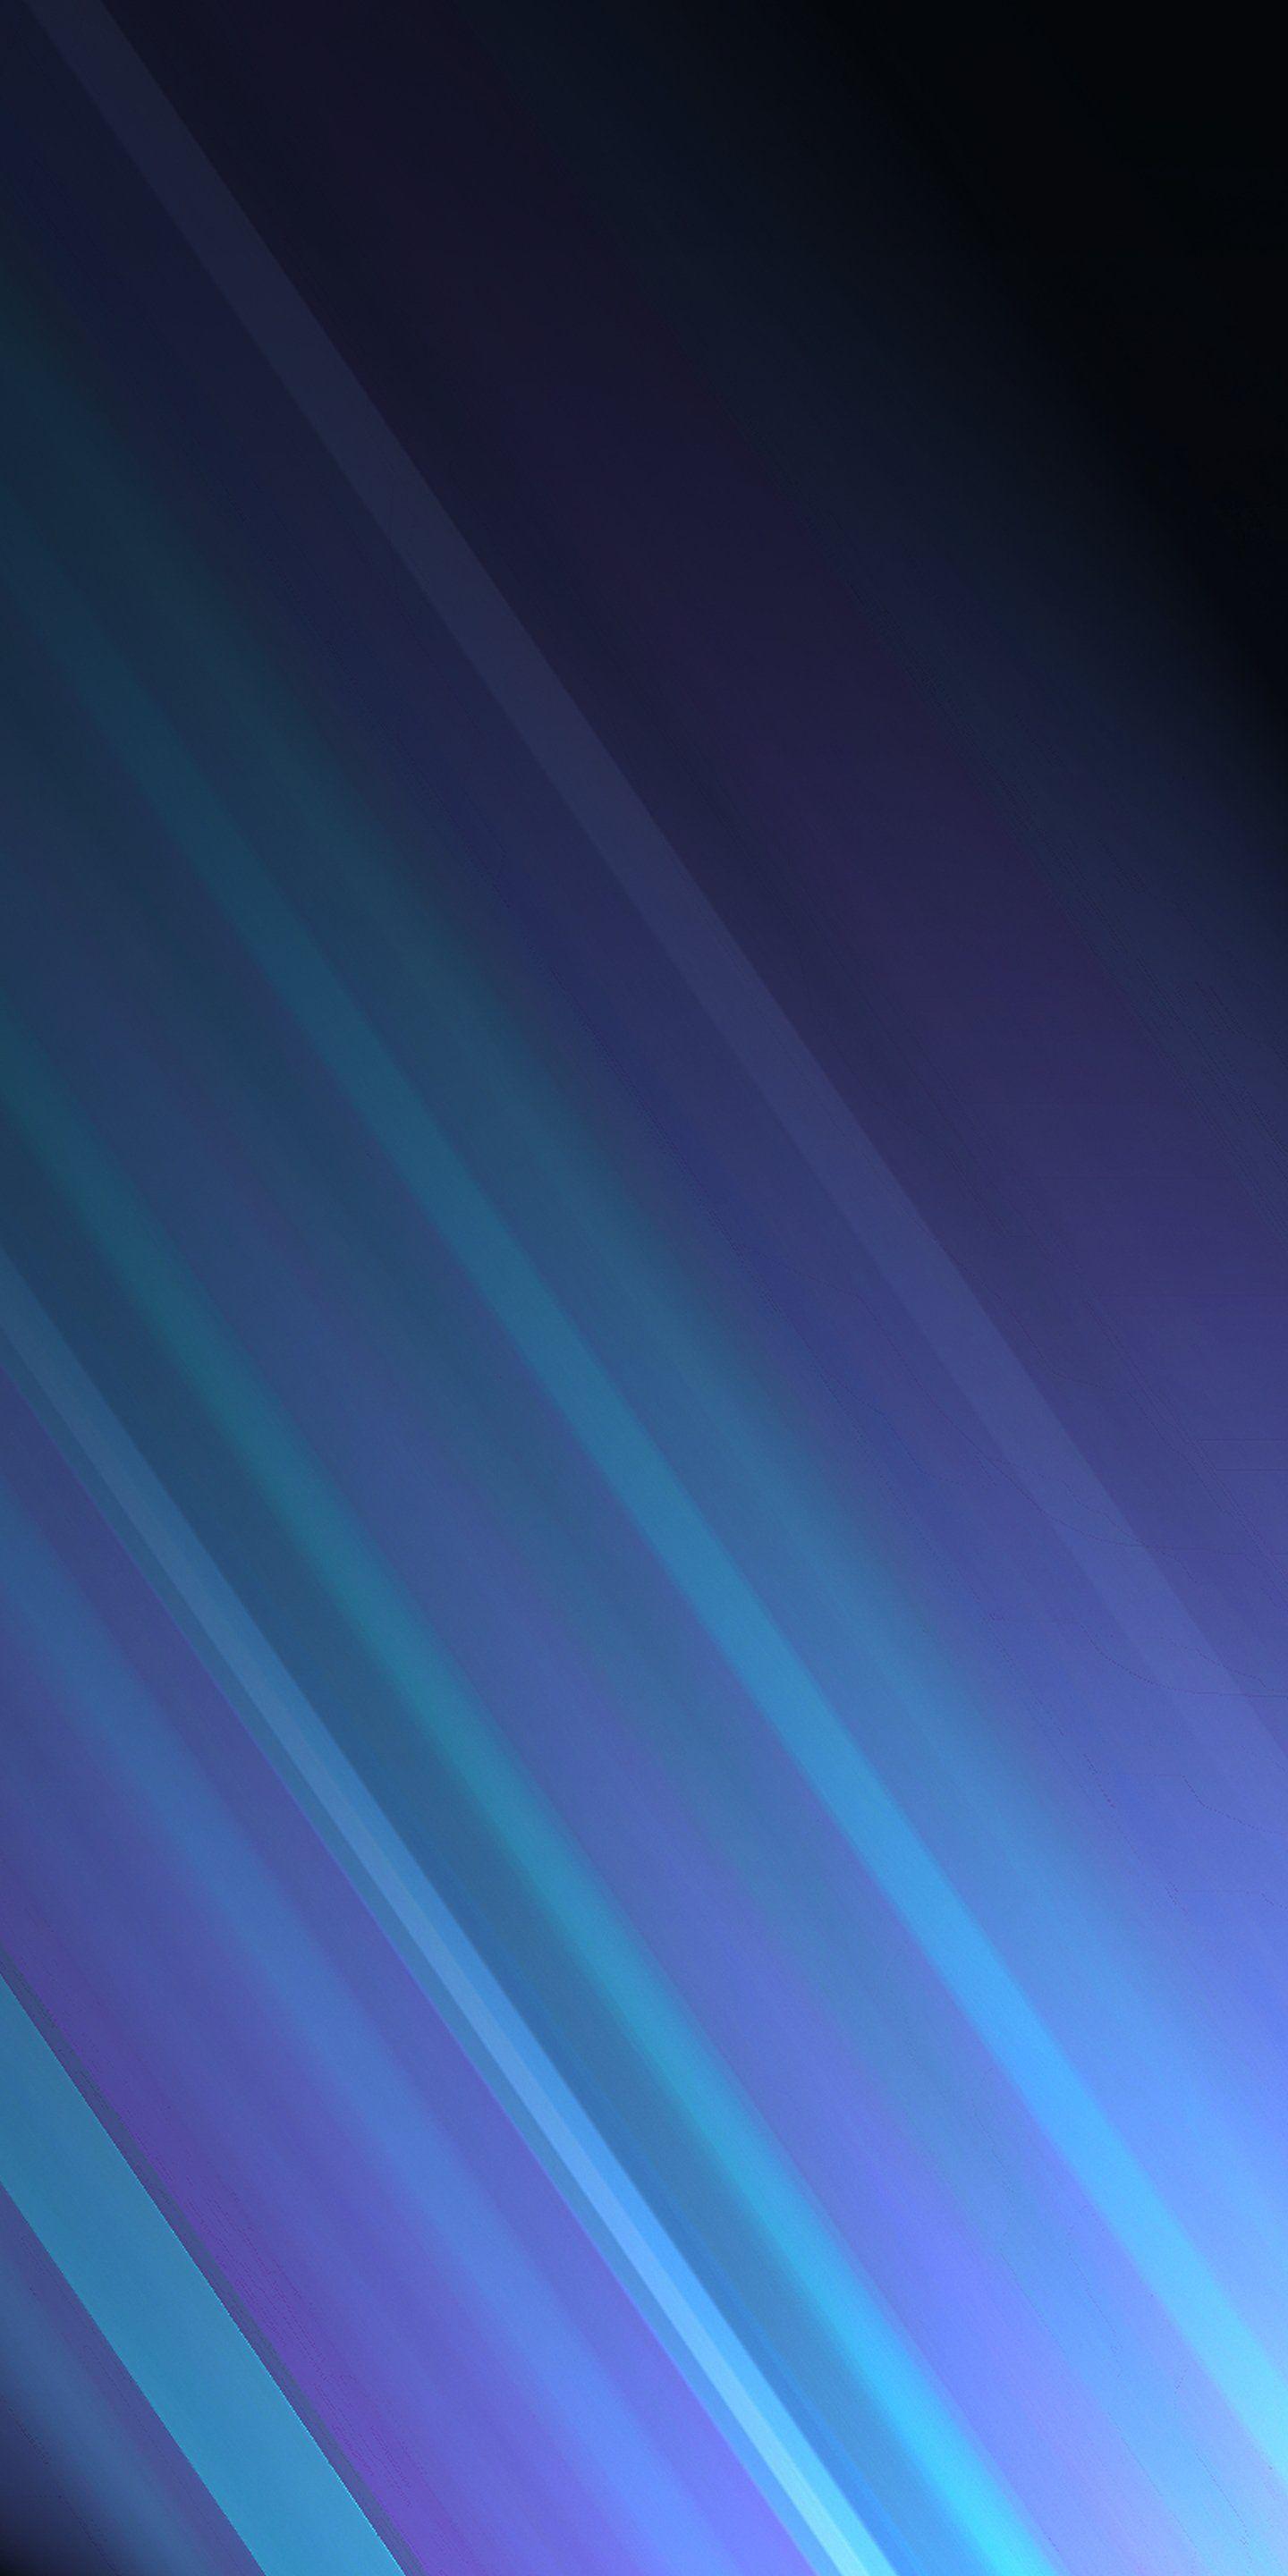 Download the LG V30's official wallpaper for your phone right now